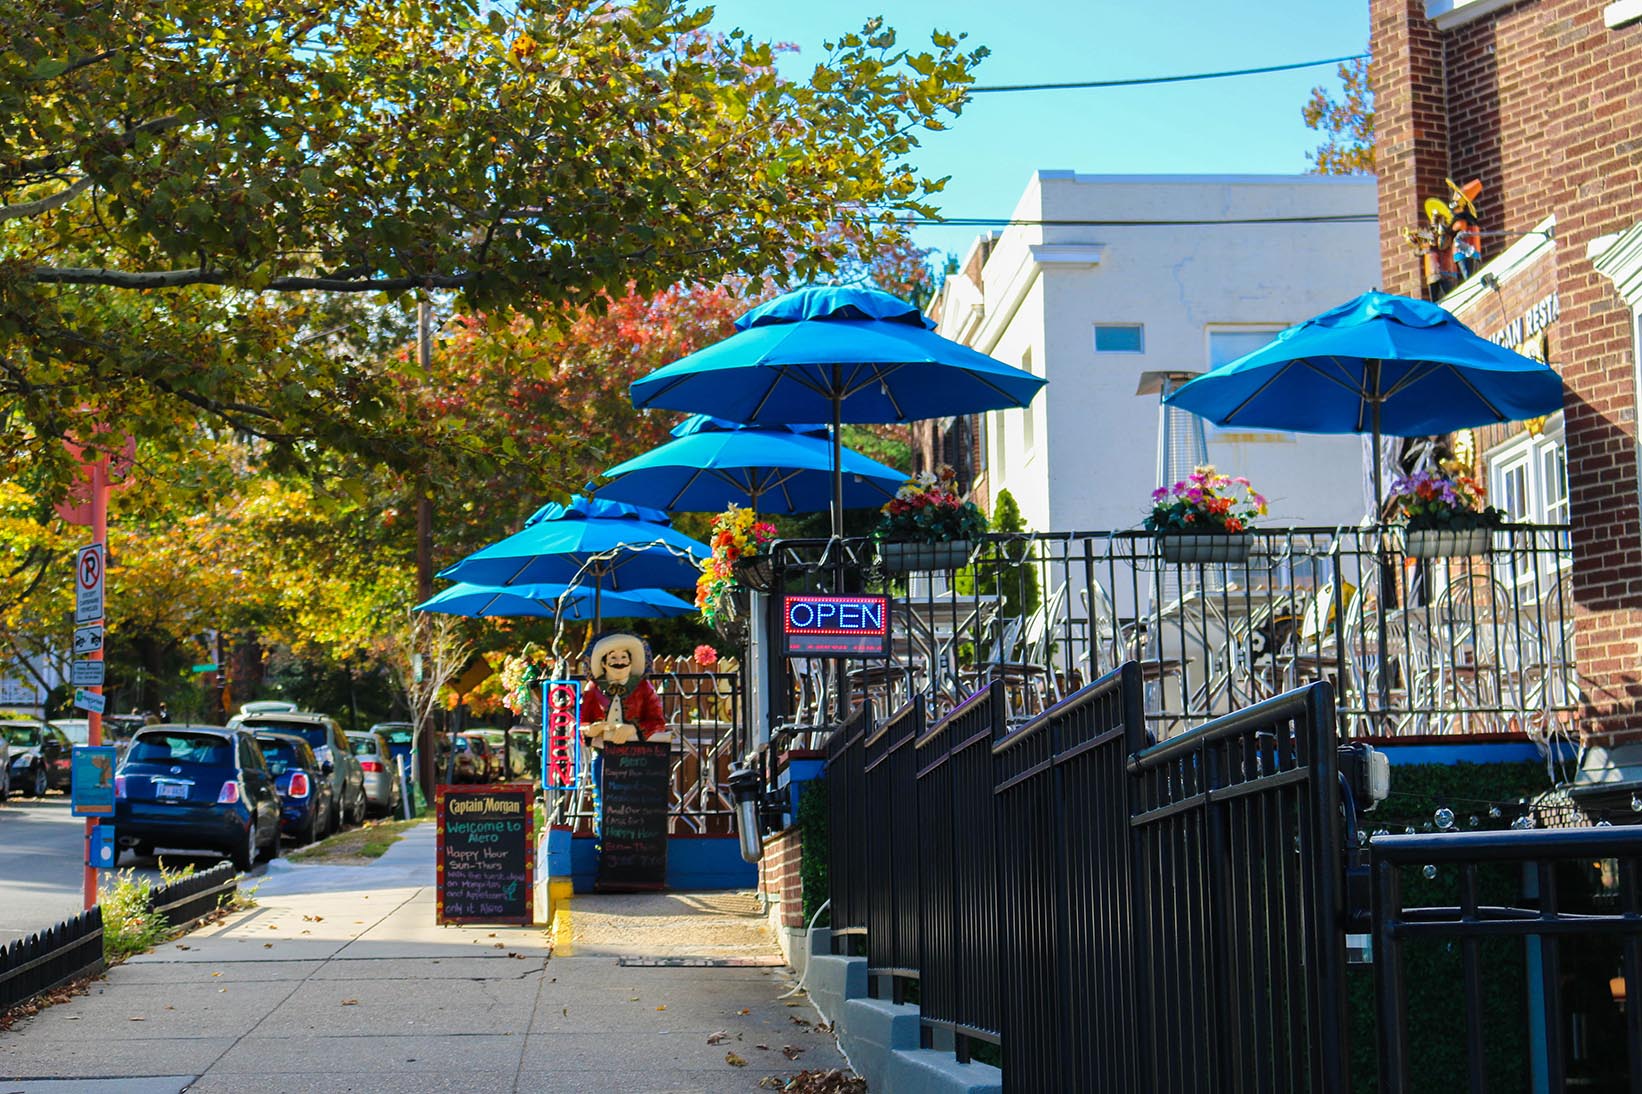 Outdoor dining in Cleveland Park, Washington, DC